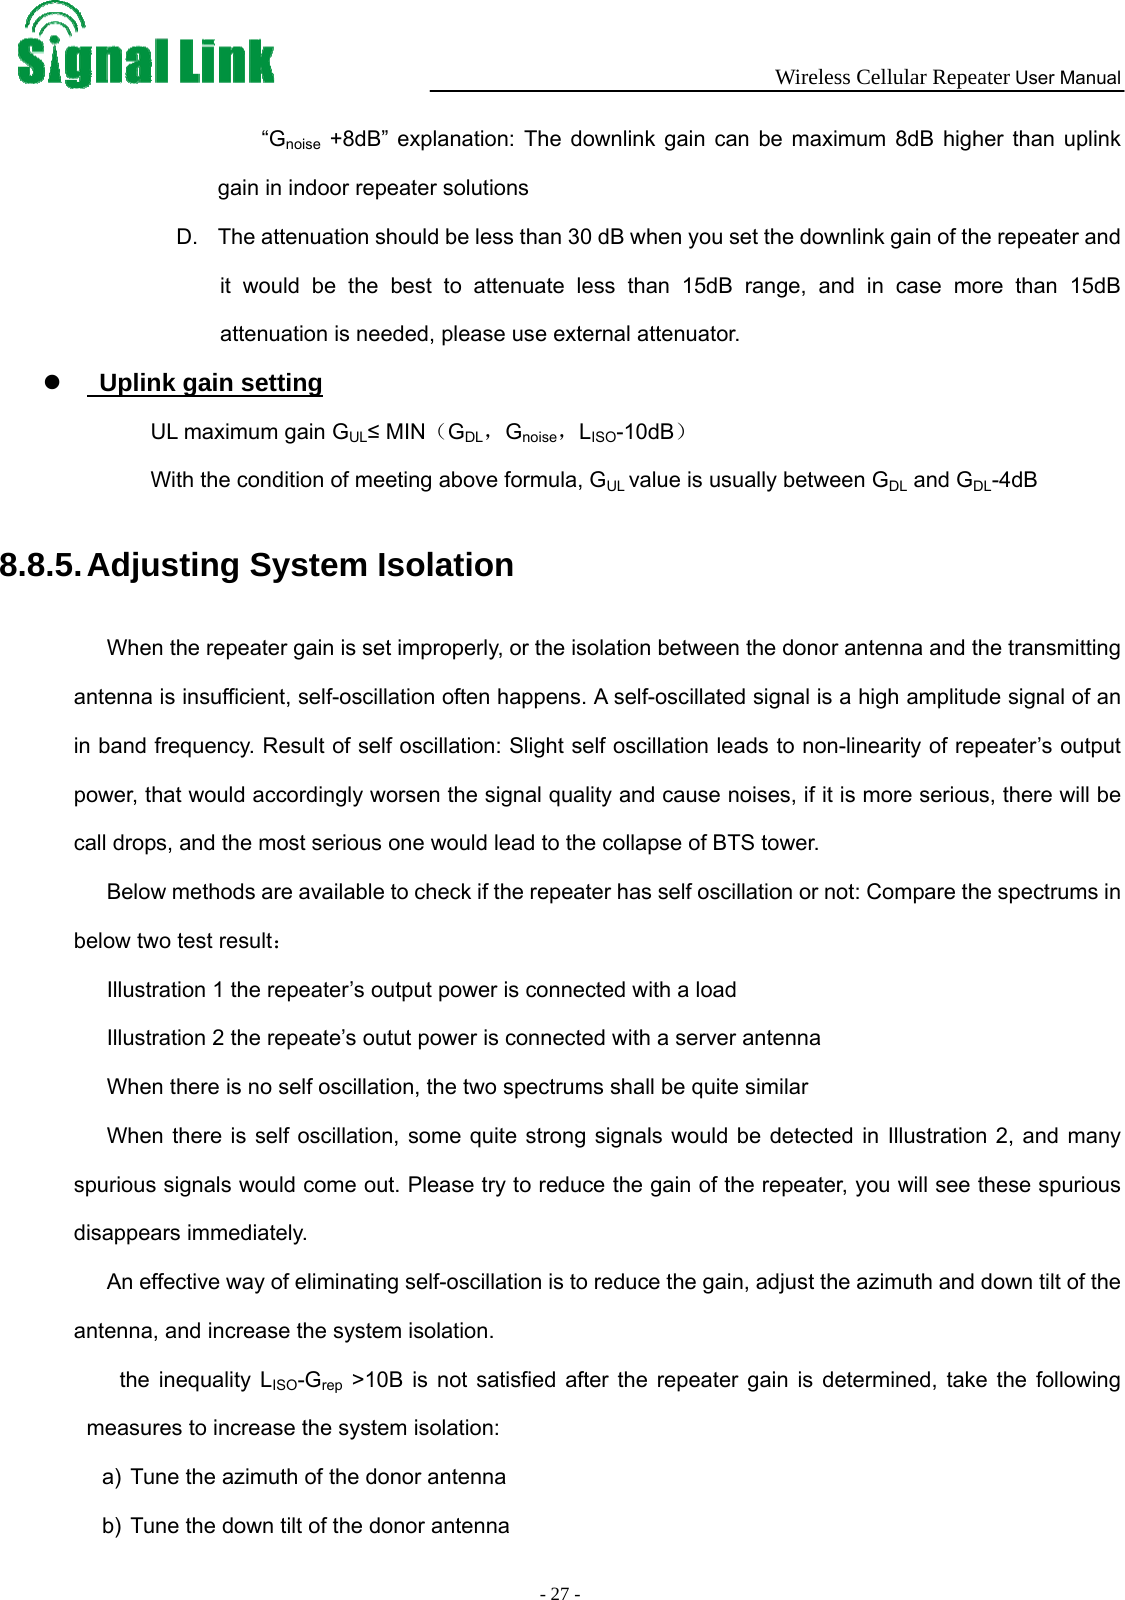  Wireless Cellular Repeater User Manual  - 27 -   “Gnoise +8dB” explanation: The downlink gain can be maximum 8dB higher than uplink gain in indoor repeater solutions D.  The attenuation should be less than 30 dB when you set the downlink gain of the repeater and it would be the best to attenuate less than 15dB range, and in case more than 15dB attenuation is needed, please use external attenuator. z   Uplink gain setting UL maximum gain GUL≤ MIN（GDL，Gnoise，LISO-10dB） With the condition of meeting above formula, GUL value is usually between GDL and GDL-4dB  8.8.5. Adjusting System Isolation When the repeater gain is set improperly, or the isolation between the donor antenna and the transmitting antenna is insufficient, self-oscillation often happens. A self-oscillated signal is a high amplitude signal of an in band frequency. Result of self oscillation: Slight self oscillation leads to non-linearity of repeater’s output power, that would accordingly worsen the signal quality and cause noises, if it is more serious, there will be call drops, and the most serious one would lead to the collapse of BTS tower.   Below methods are available to check if the repeater has self oscillation or not: Compare the spectrums in below two test result： Illustration 1 the repeater’s output power is connected with a load Illustration 2 the repeate’s outut power is connected with a server antenna When there is no self oscillation, the two spectrums shall be quite similar When there is self oscillation, some quite strong signals would be detected in Illustration 2, and many spurious signals would come out. Please try to reduce the gain of the repeater, you will see these spurious disappears immediately.   An effective way of eliminating self-oscillation is to reduce the gain, adjust the azimuth and down tilt of the antenna, and increase the system isolation. the inequality LISO-Grep &gt;10B is not satisfied after the repeater gain is determined, take the following measures to increase the system isolation: a)  Tune the azimuth of the donor antenna b)  Tune the down tilt of the donor antenna 